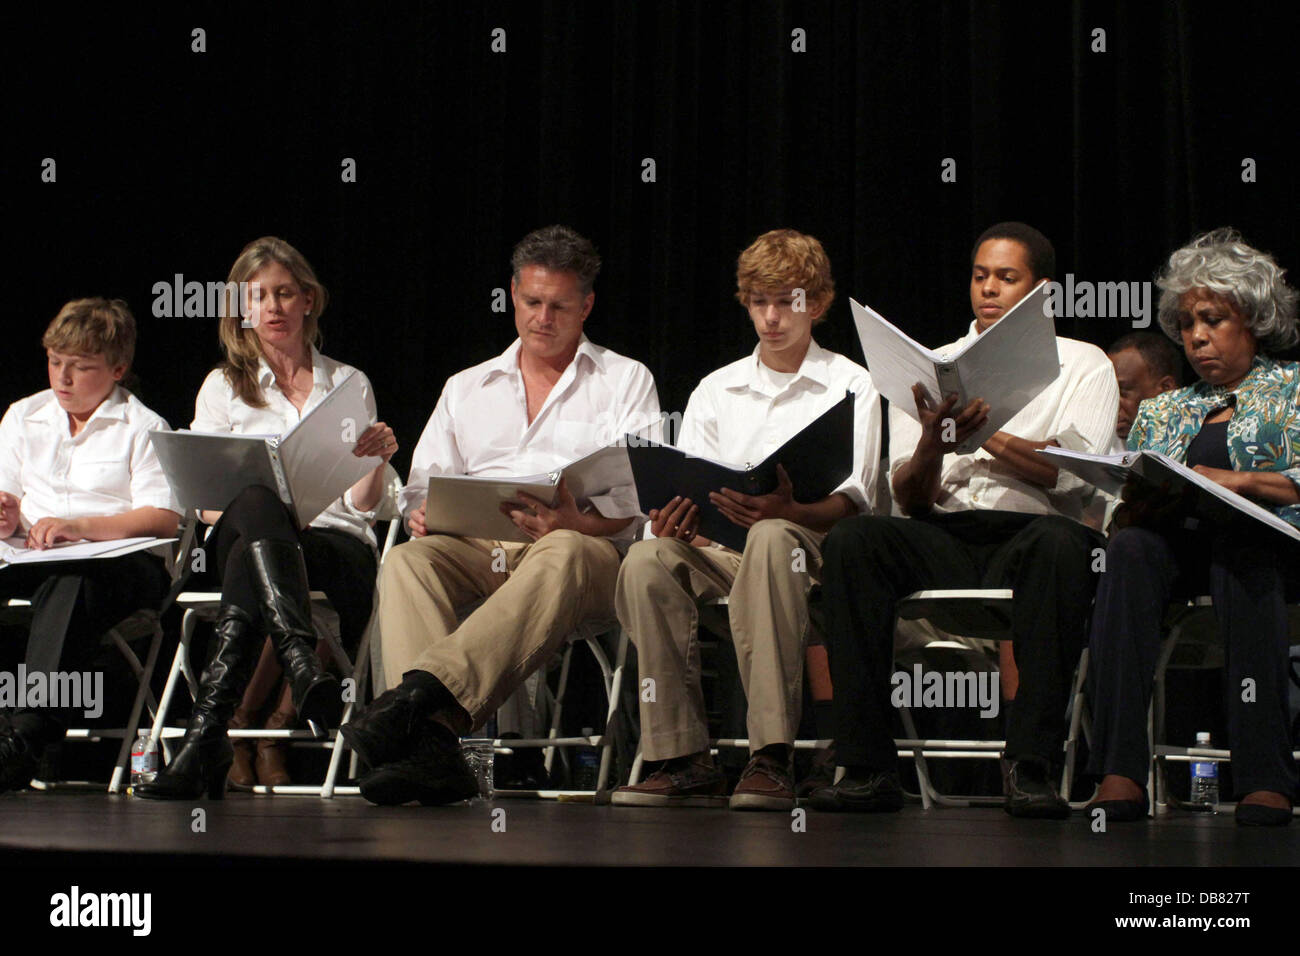 Robert Watzke, Zane Amundsen, Helen Slater, David Humphrey, Tyler Voss, Shedrack Anderson and Starletta DuPois 'The Road To Freedom' live audience stage reading at The LACC Camino Theatre Los Angeles, California - 15.05.11 Stock Photo